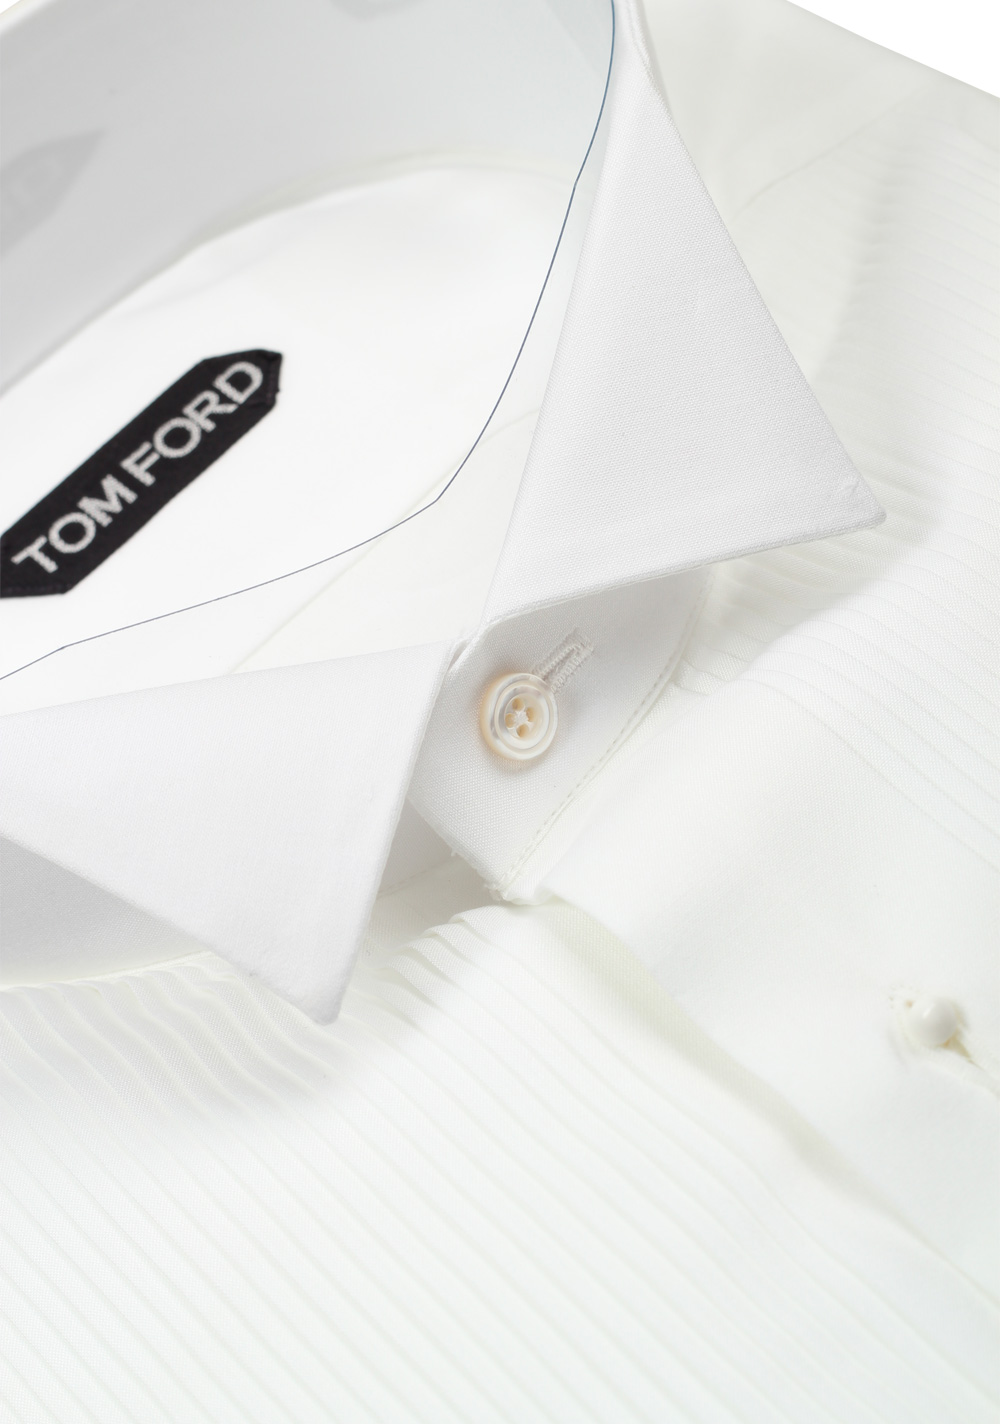 TOM FORD Solid White Signature Tuxedo Shirt With French Cuffs | Costume Limité